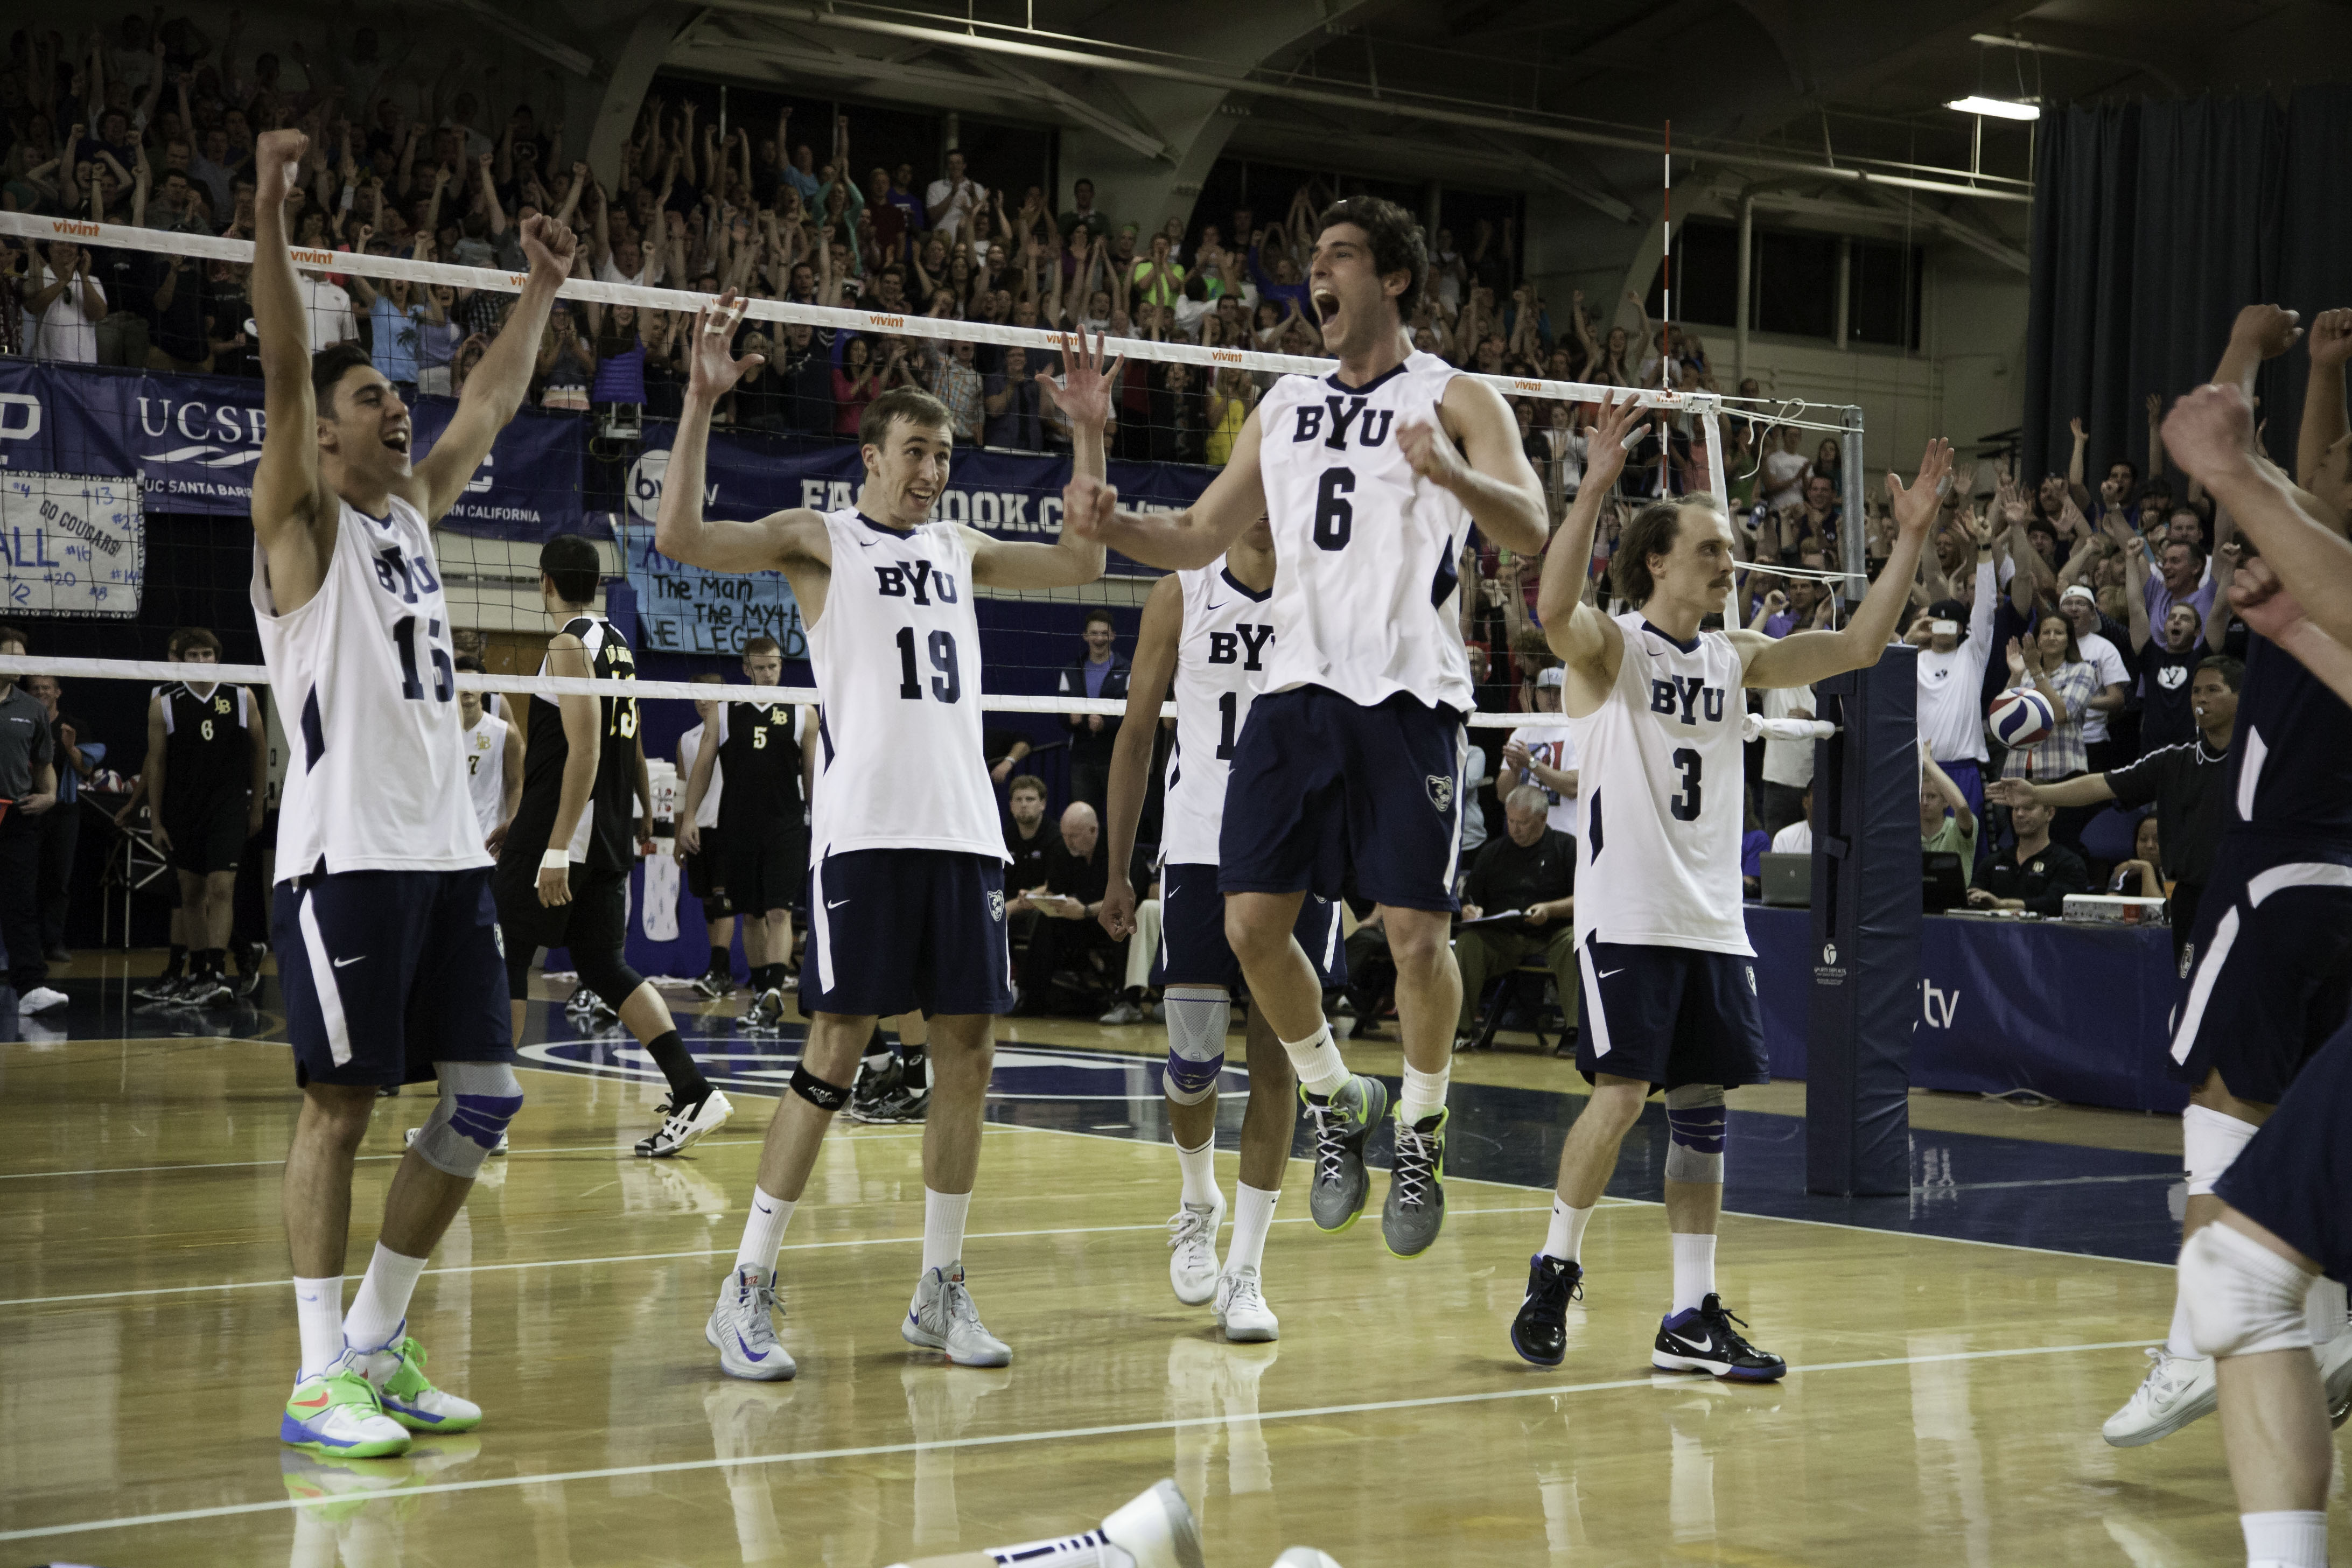 The BYU volleyball team celebrates after winning the final point to clinch the 2013 MPSF Championship title. The team progressed all the way through the NCAA Tournament, making it to the NCAA Championship game, where it fell to UC-Irvine. (Photo by Elliott Miller)